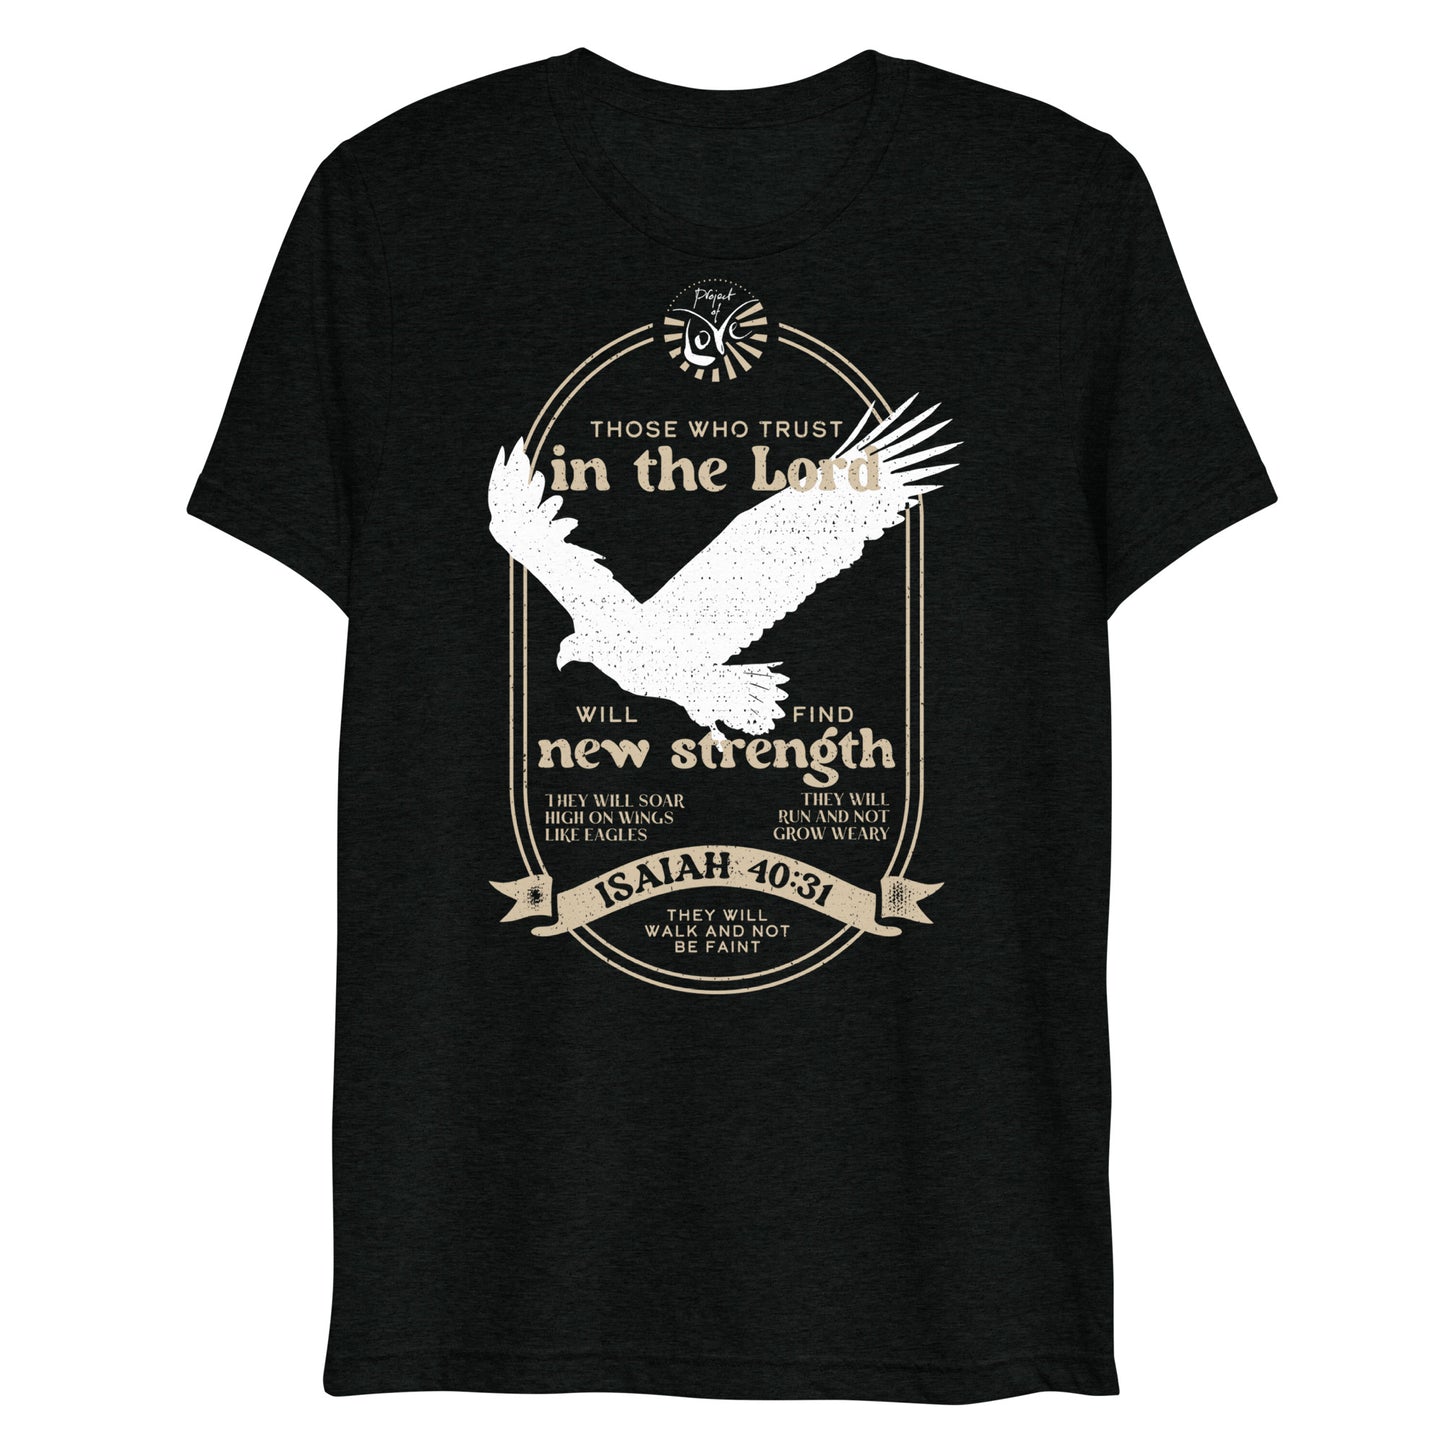 Vintage T-shirt Isaiah 40:31 'Those Who Trust in the Lord'